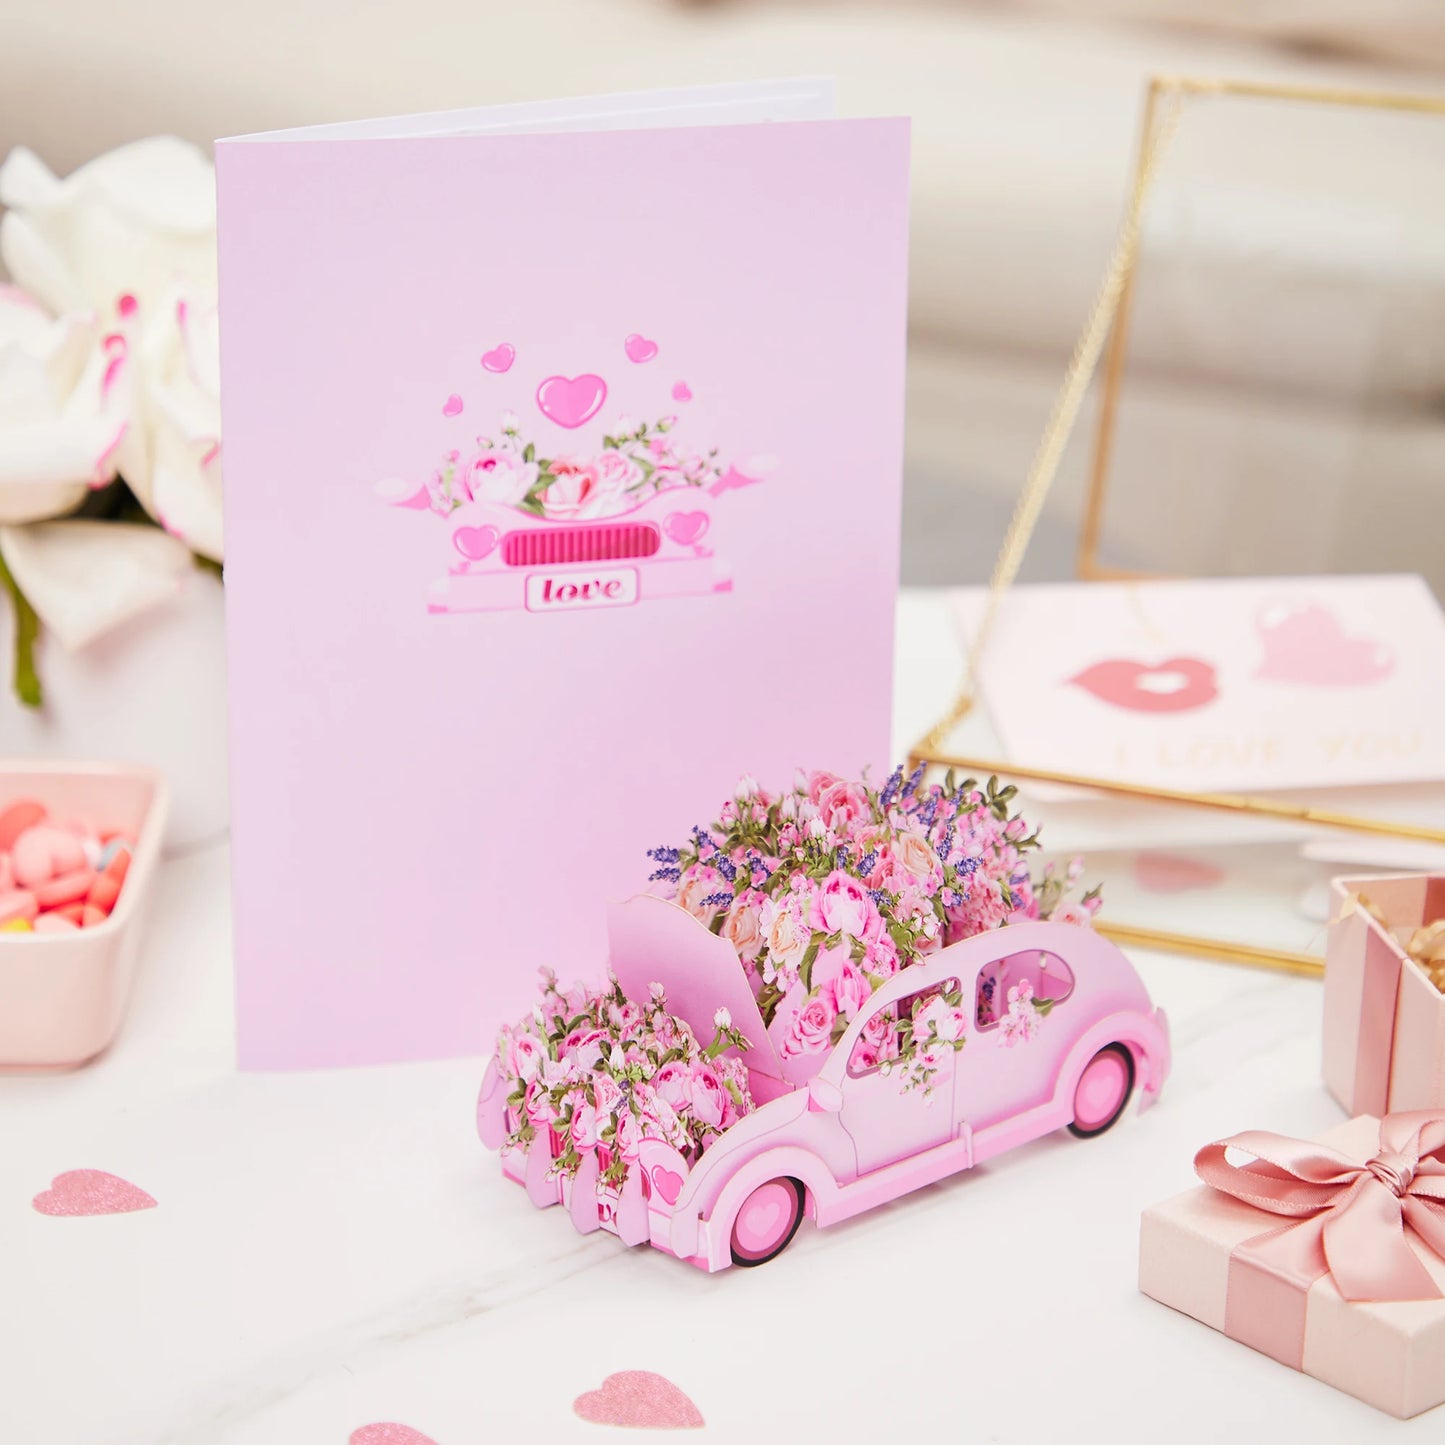 Valentine Cards Beautiful Flower Caravan Greeting Card Valentine's Day Gifts For Wife Couple Girlfriend Pink Lovely Presents